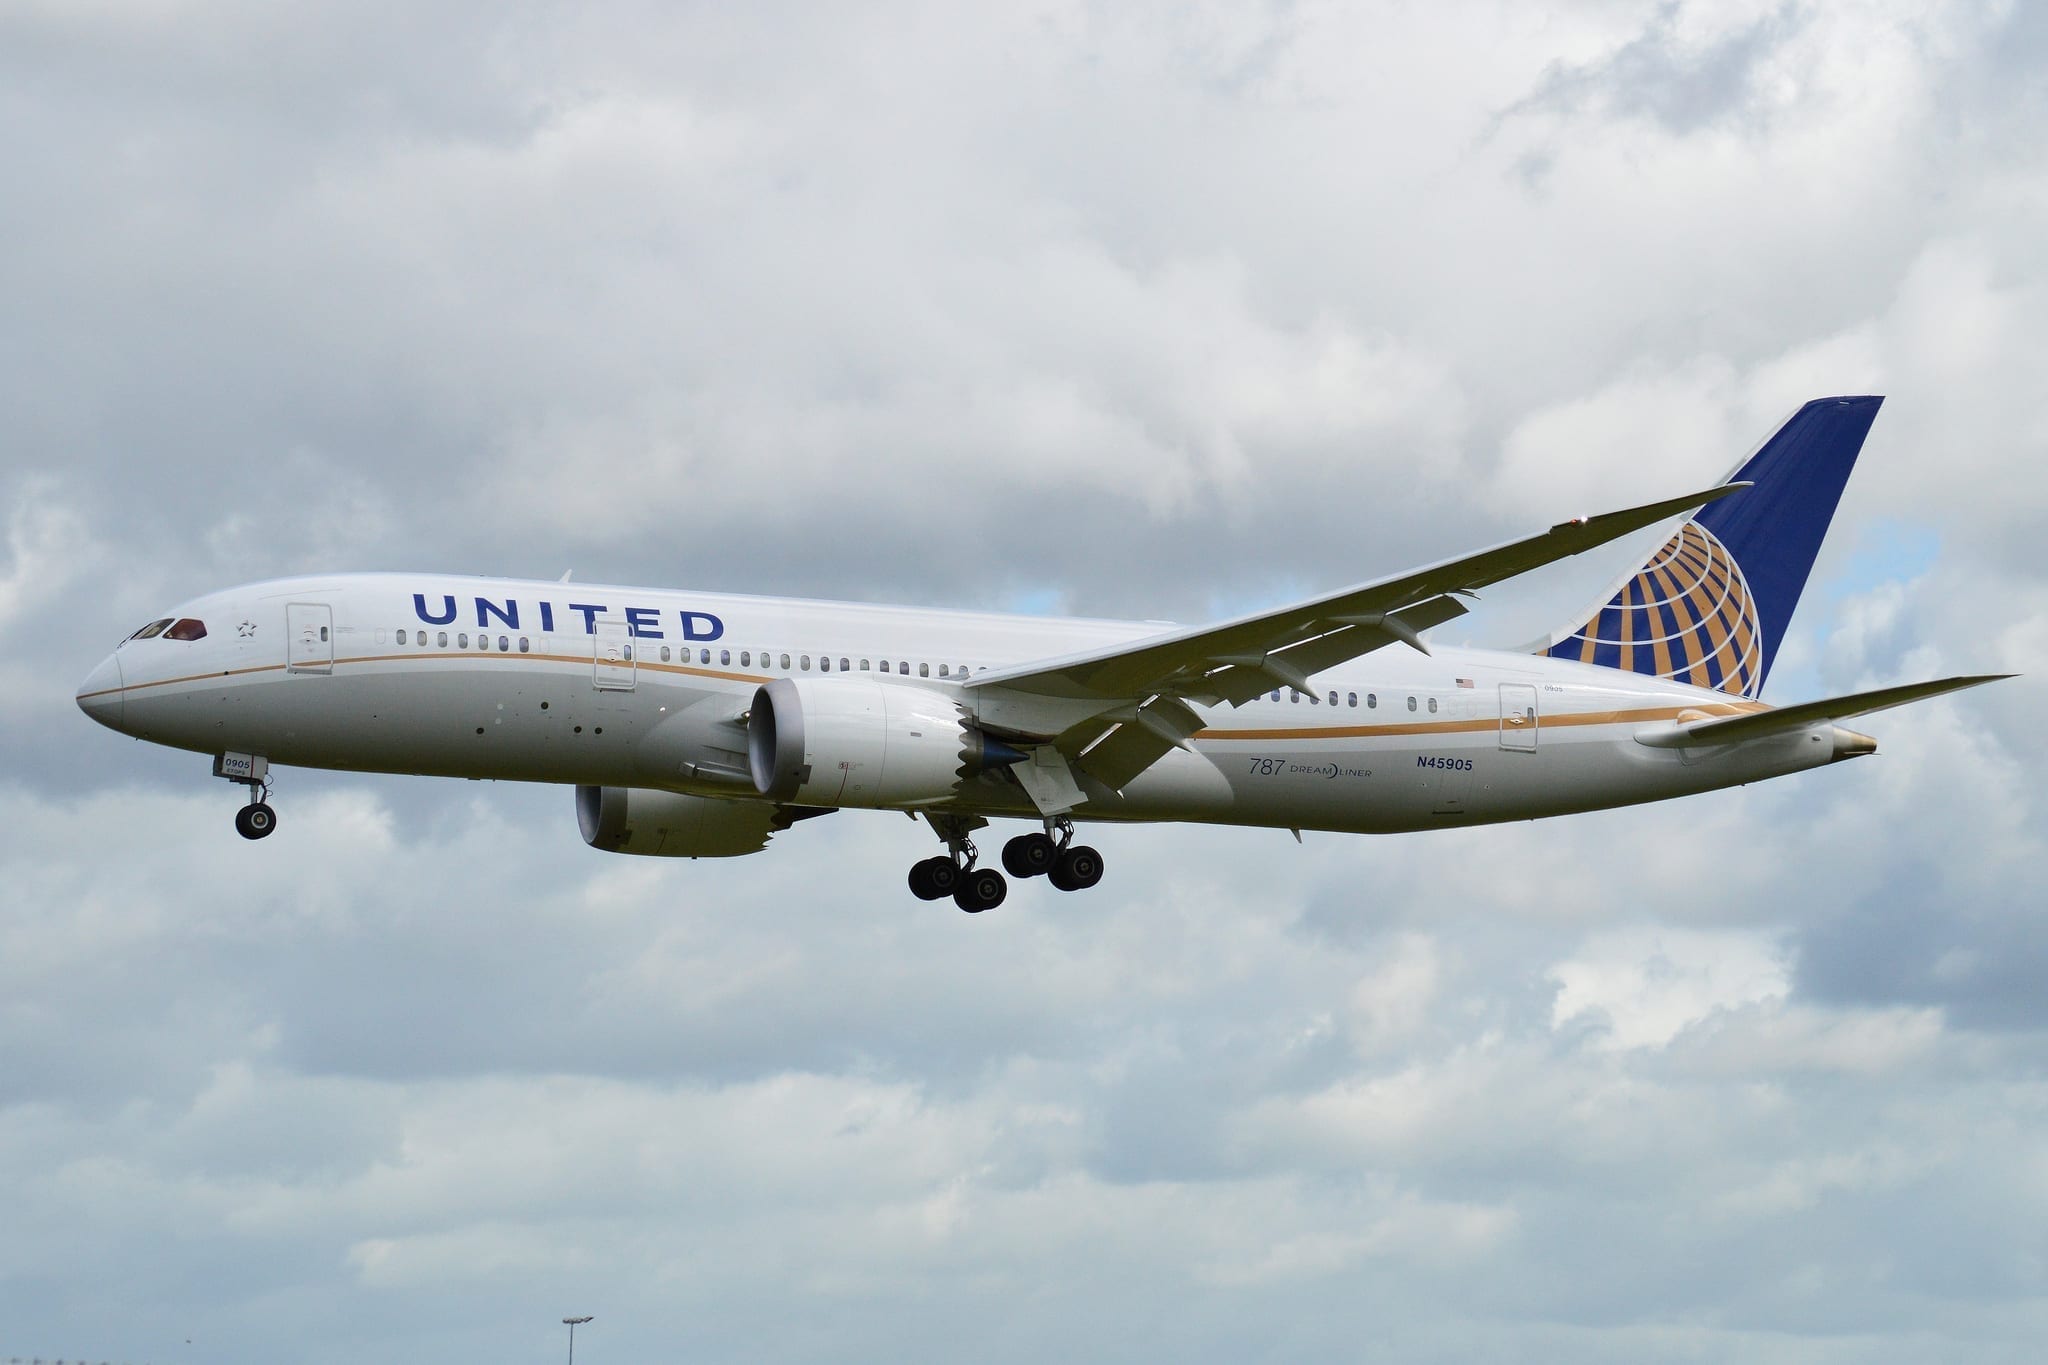 Boeing 787-8 'N45905' United Airlines; photo by Alan Wilson, via Flickr, CC BY-SA 2.0, no changes.